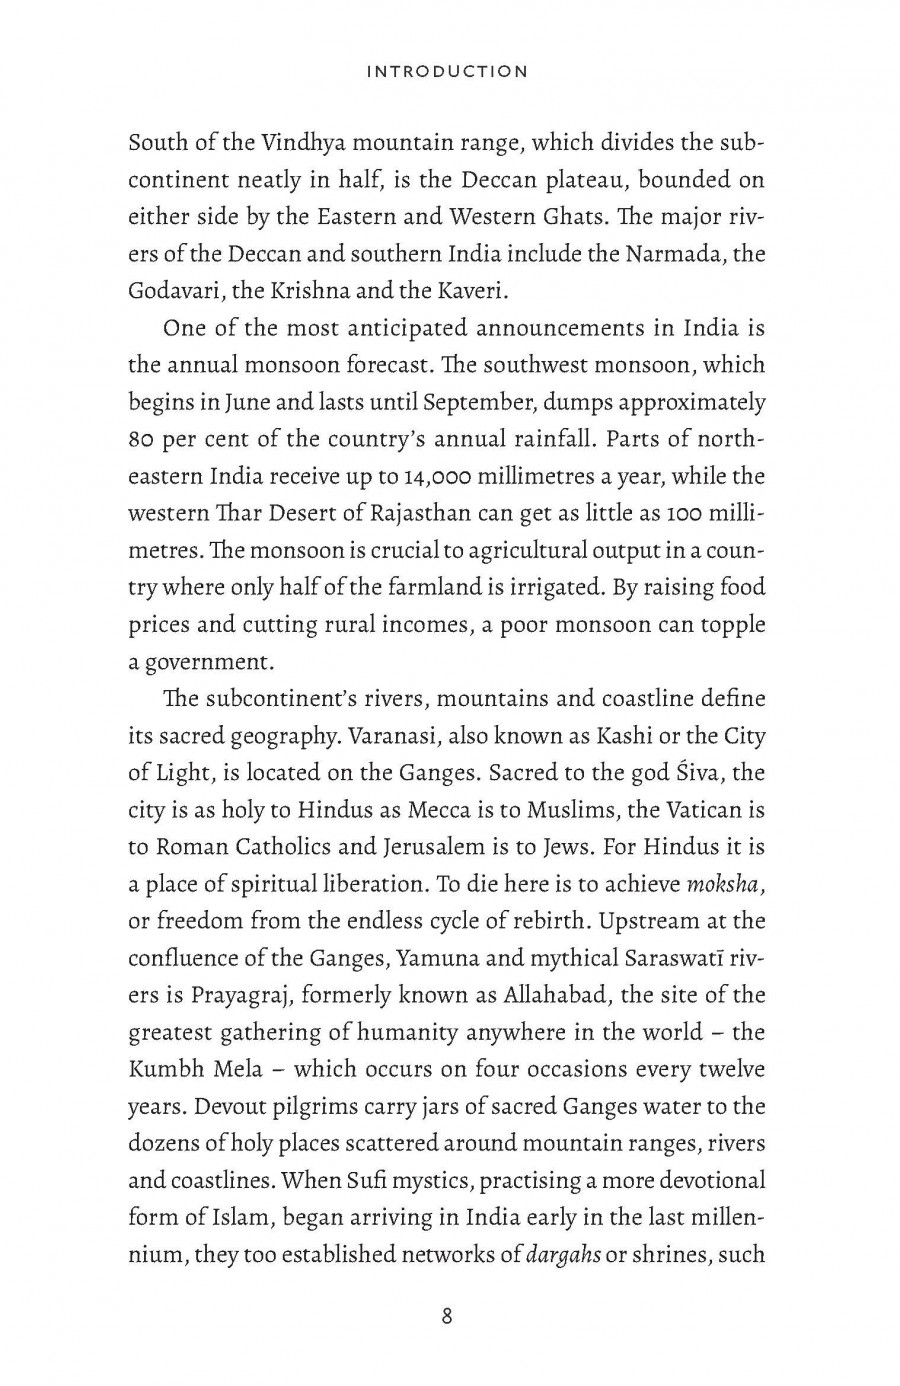 The Shortest History of India